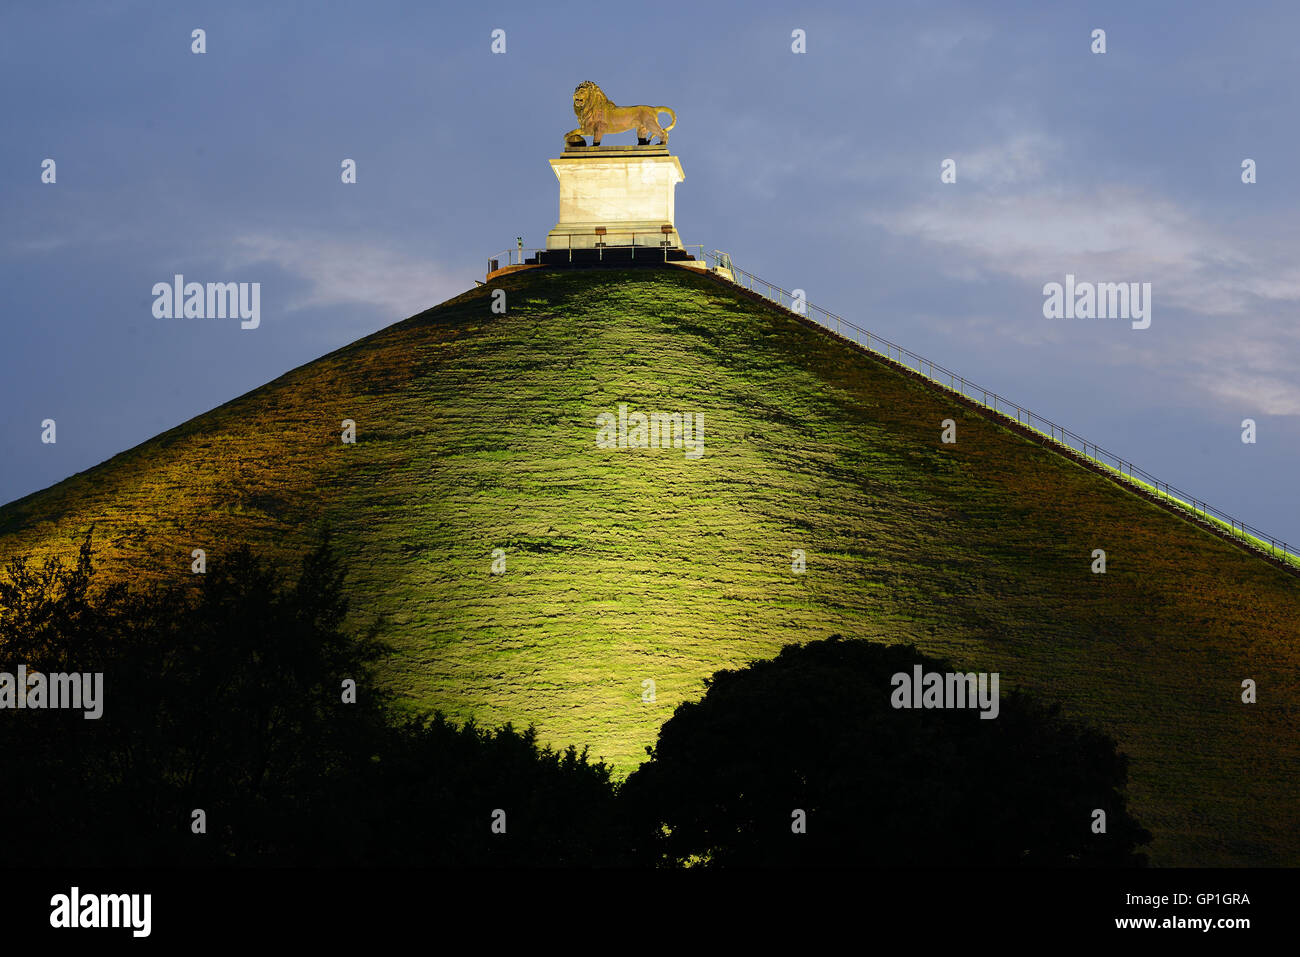 Butte du Lion Monument at night. Waterloo, Wallonia, Belgium. Stock Photo